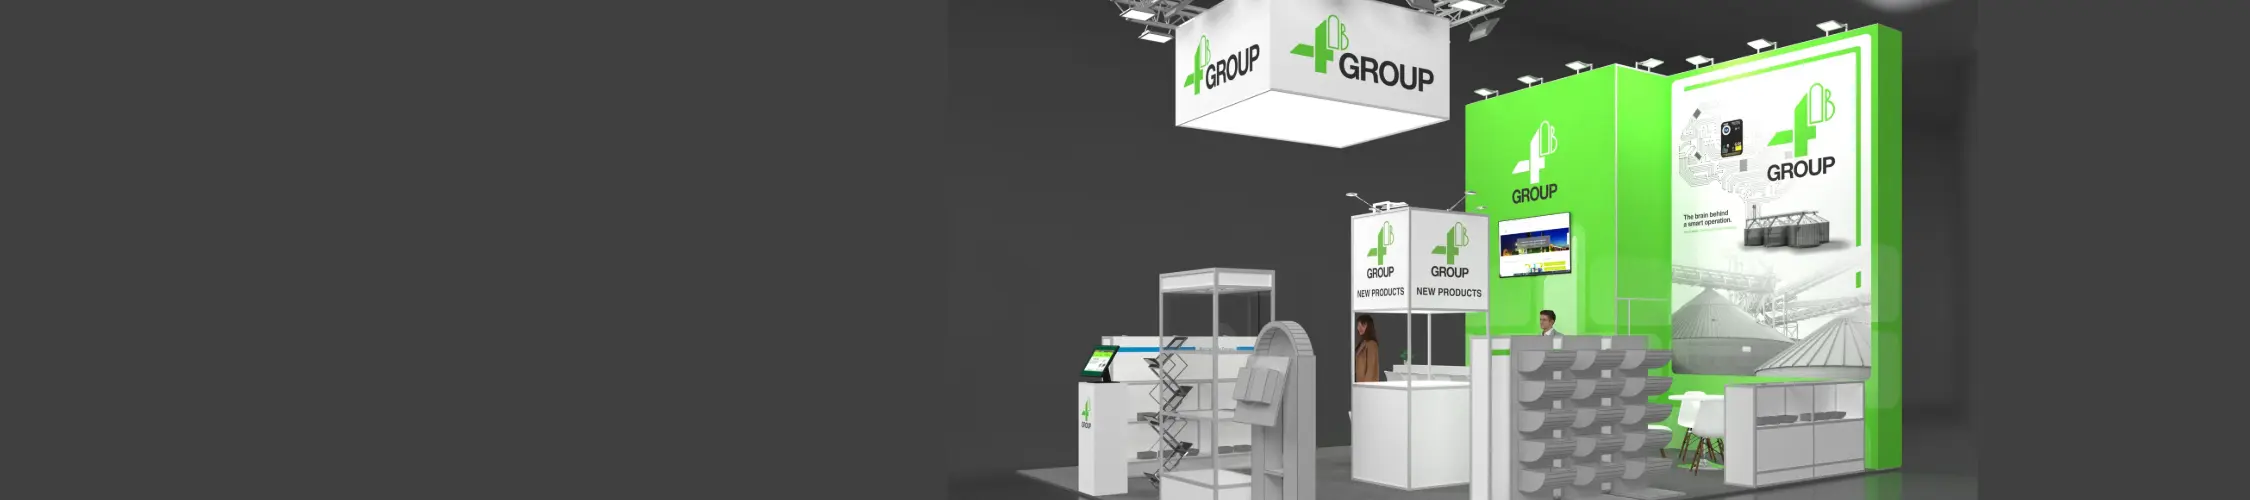 meet 4B Group at exhibitions